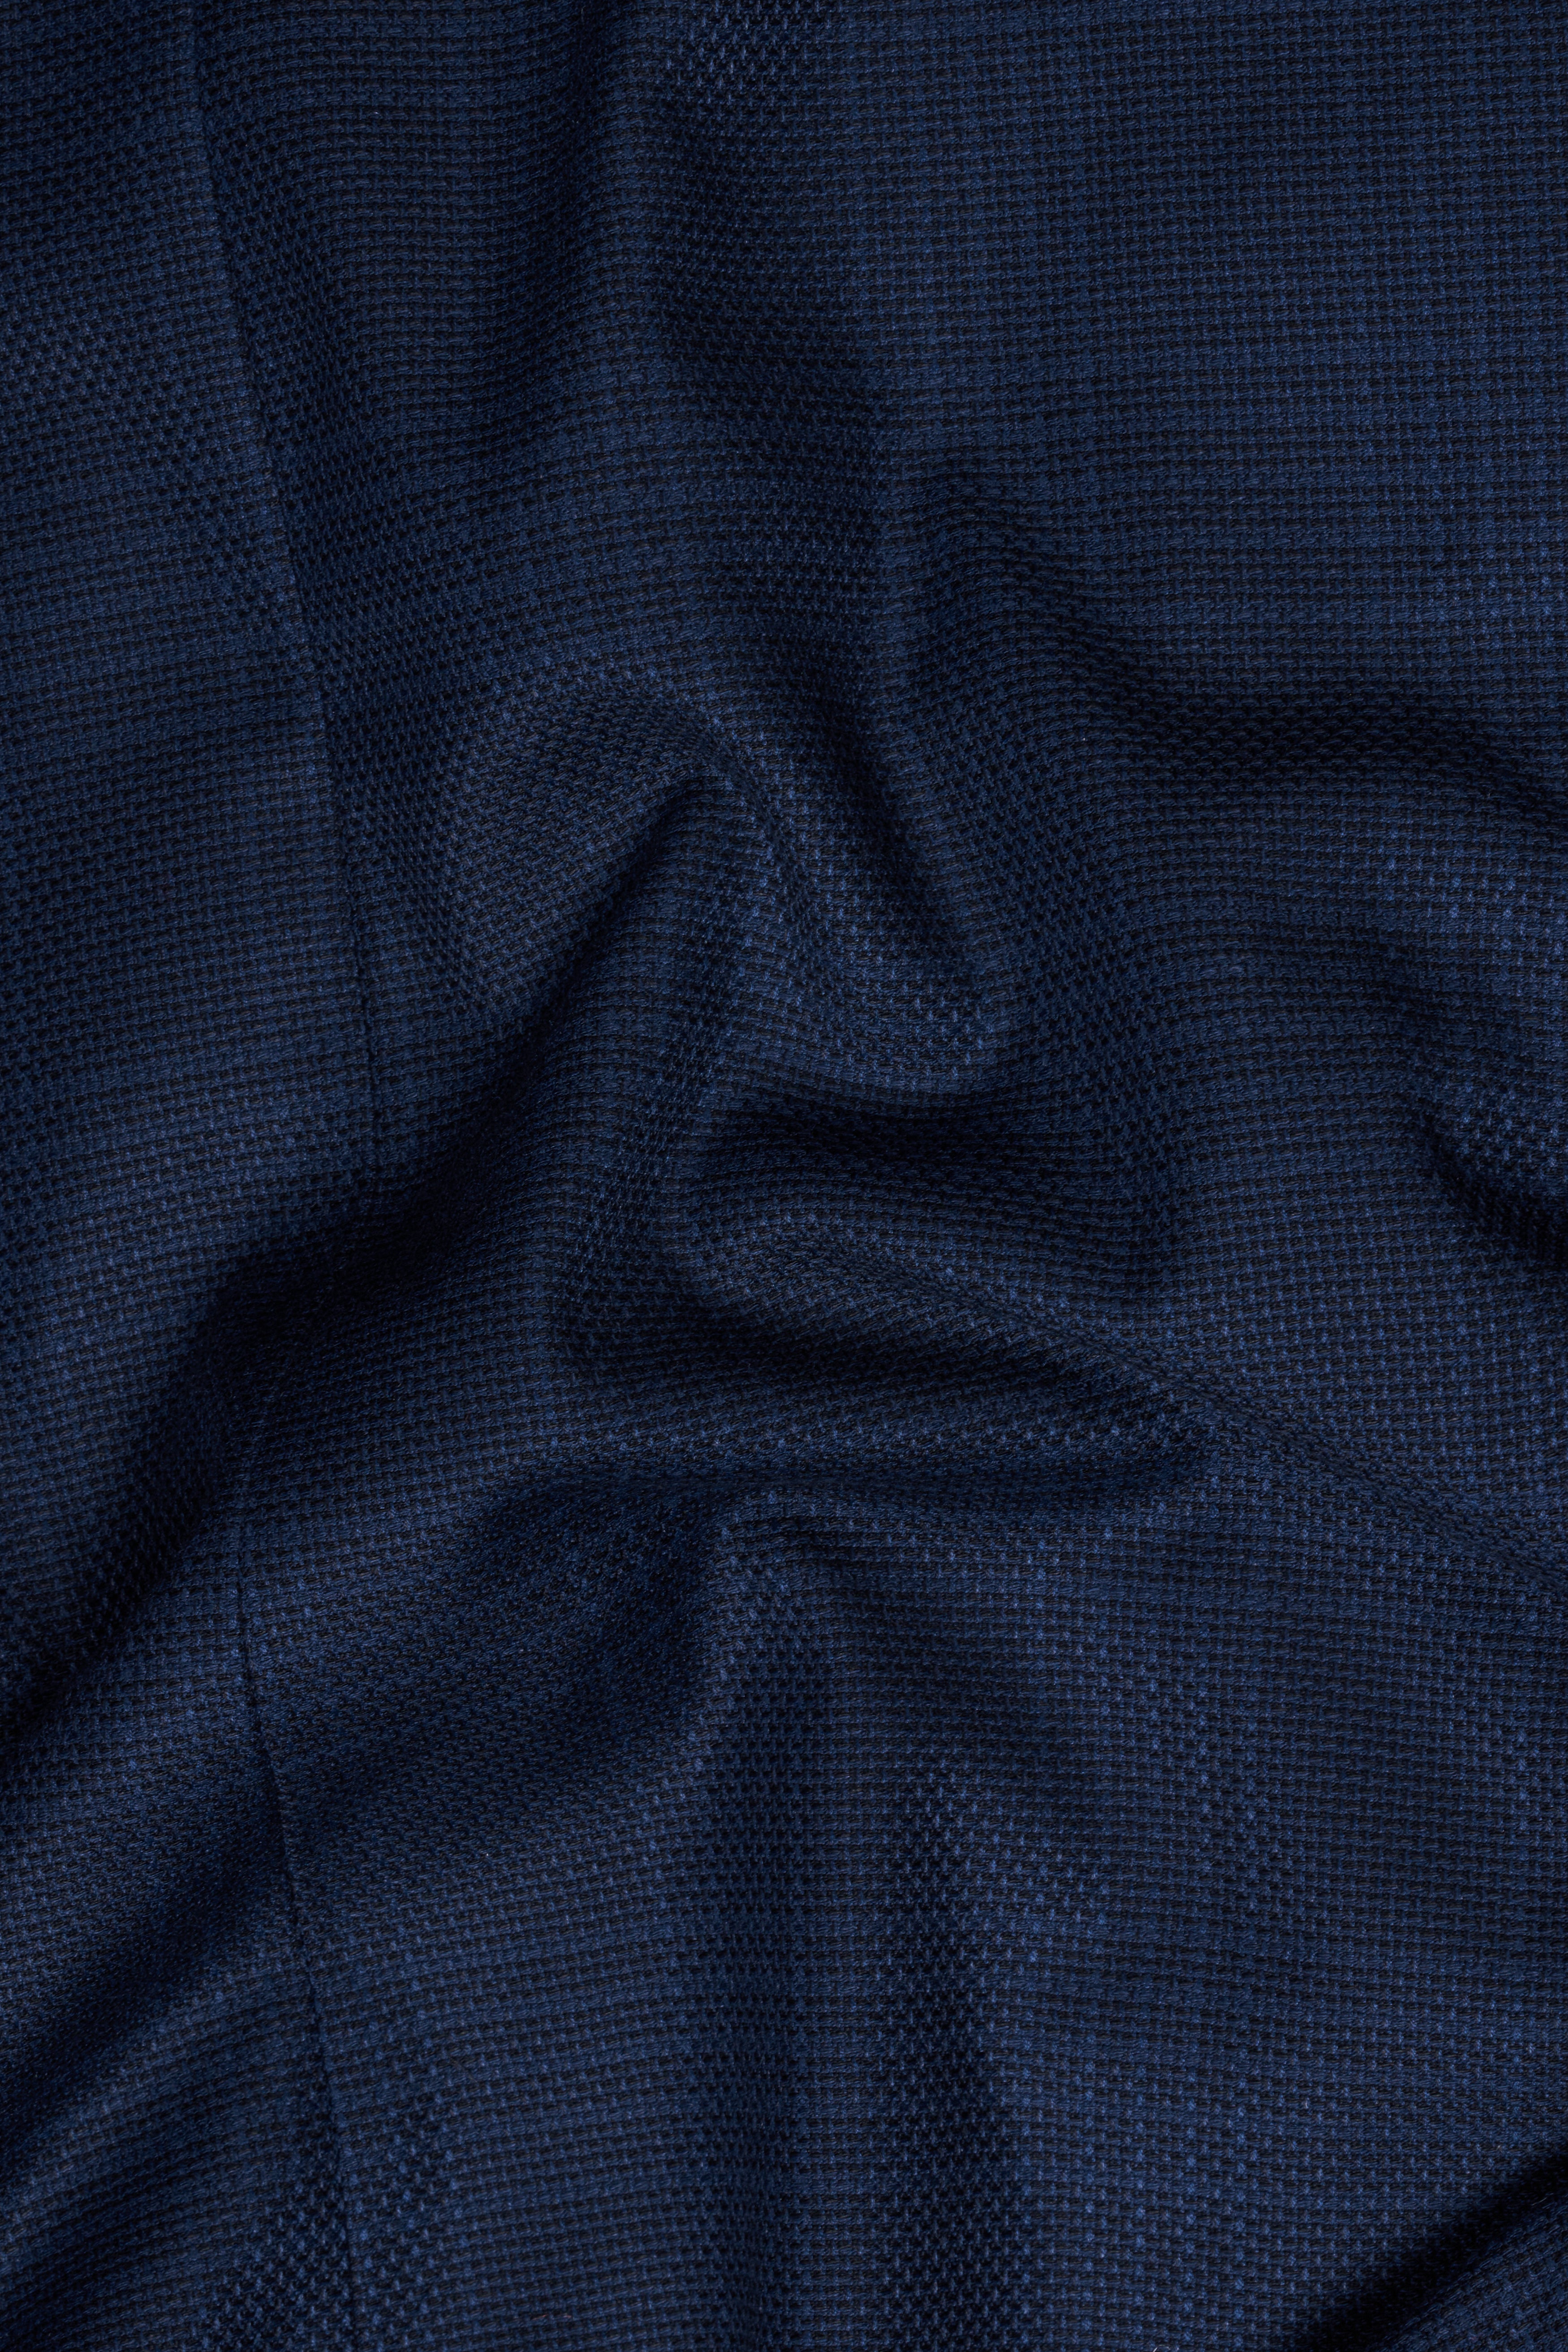 Prussian Blue Subtle Checkered Wool Rich Neharu Jacket WC2816-36, WC2816-38, WC2816-40, WC2816-42, WC2816-44, WC2816-46, WC2816-48, WC2816-50, WC2816-52, WC2816-54, WC2816-56, WC2816-58, WC2816-60